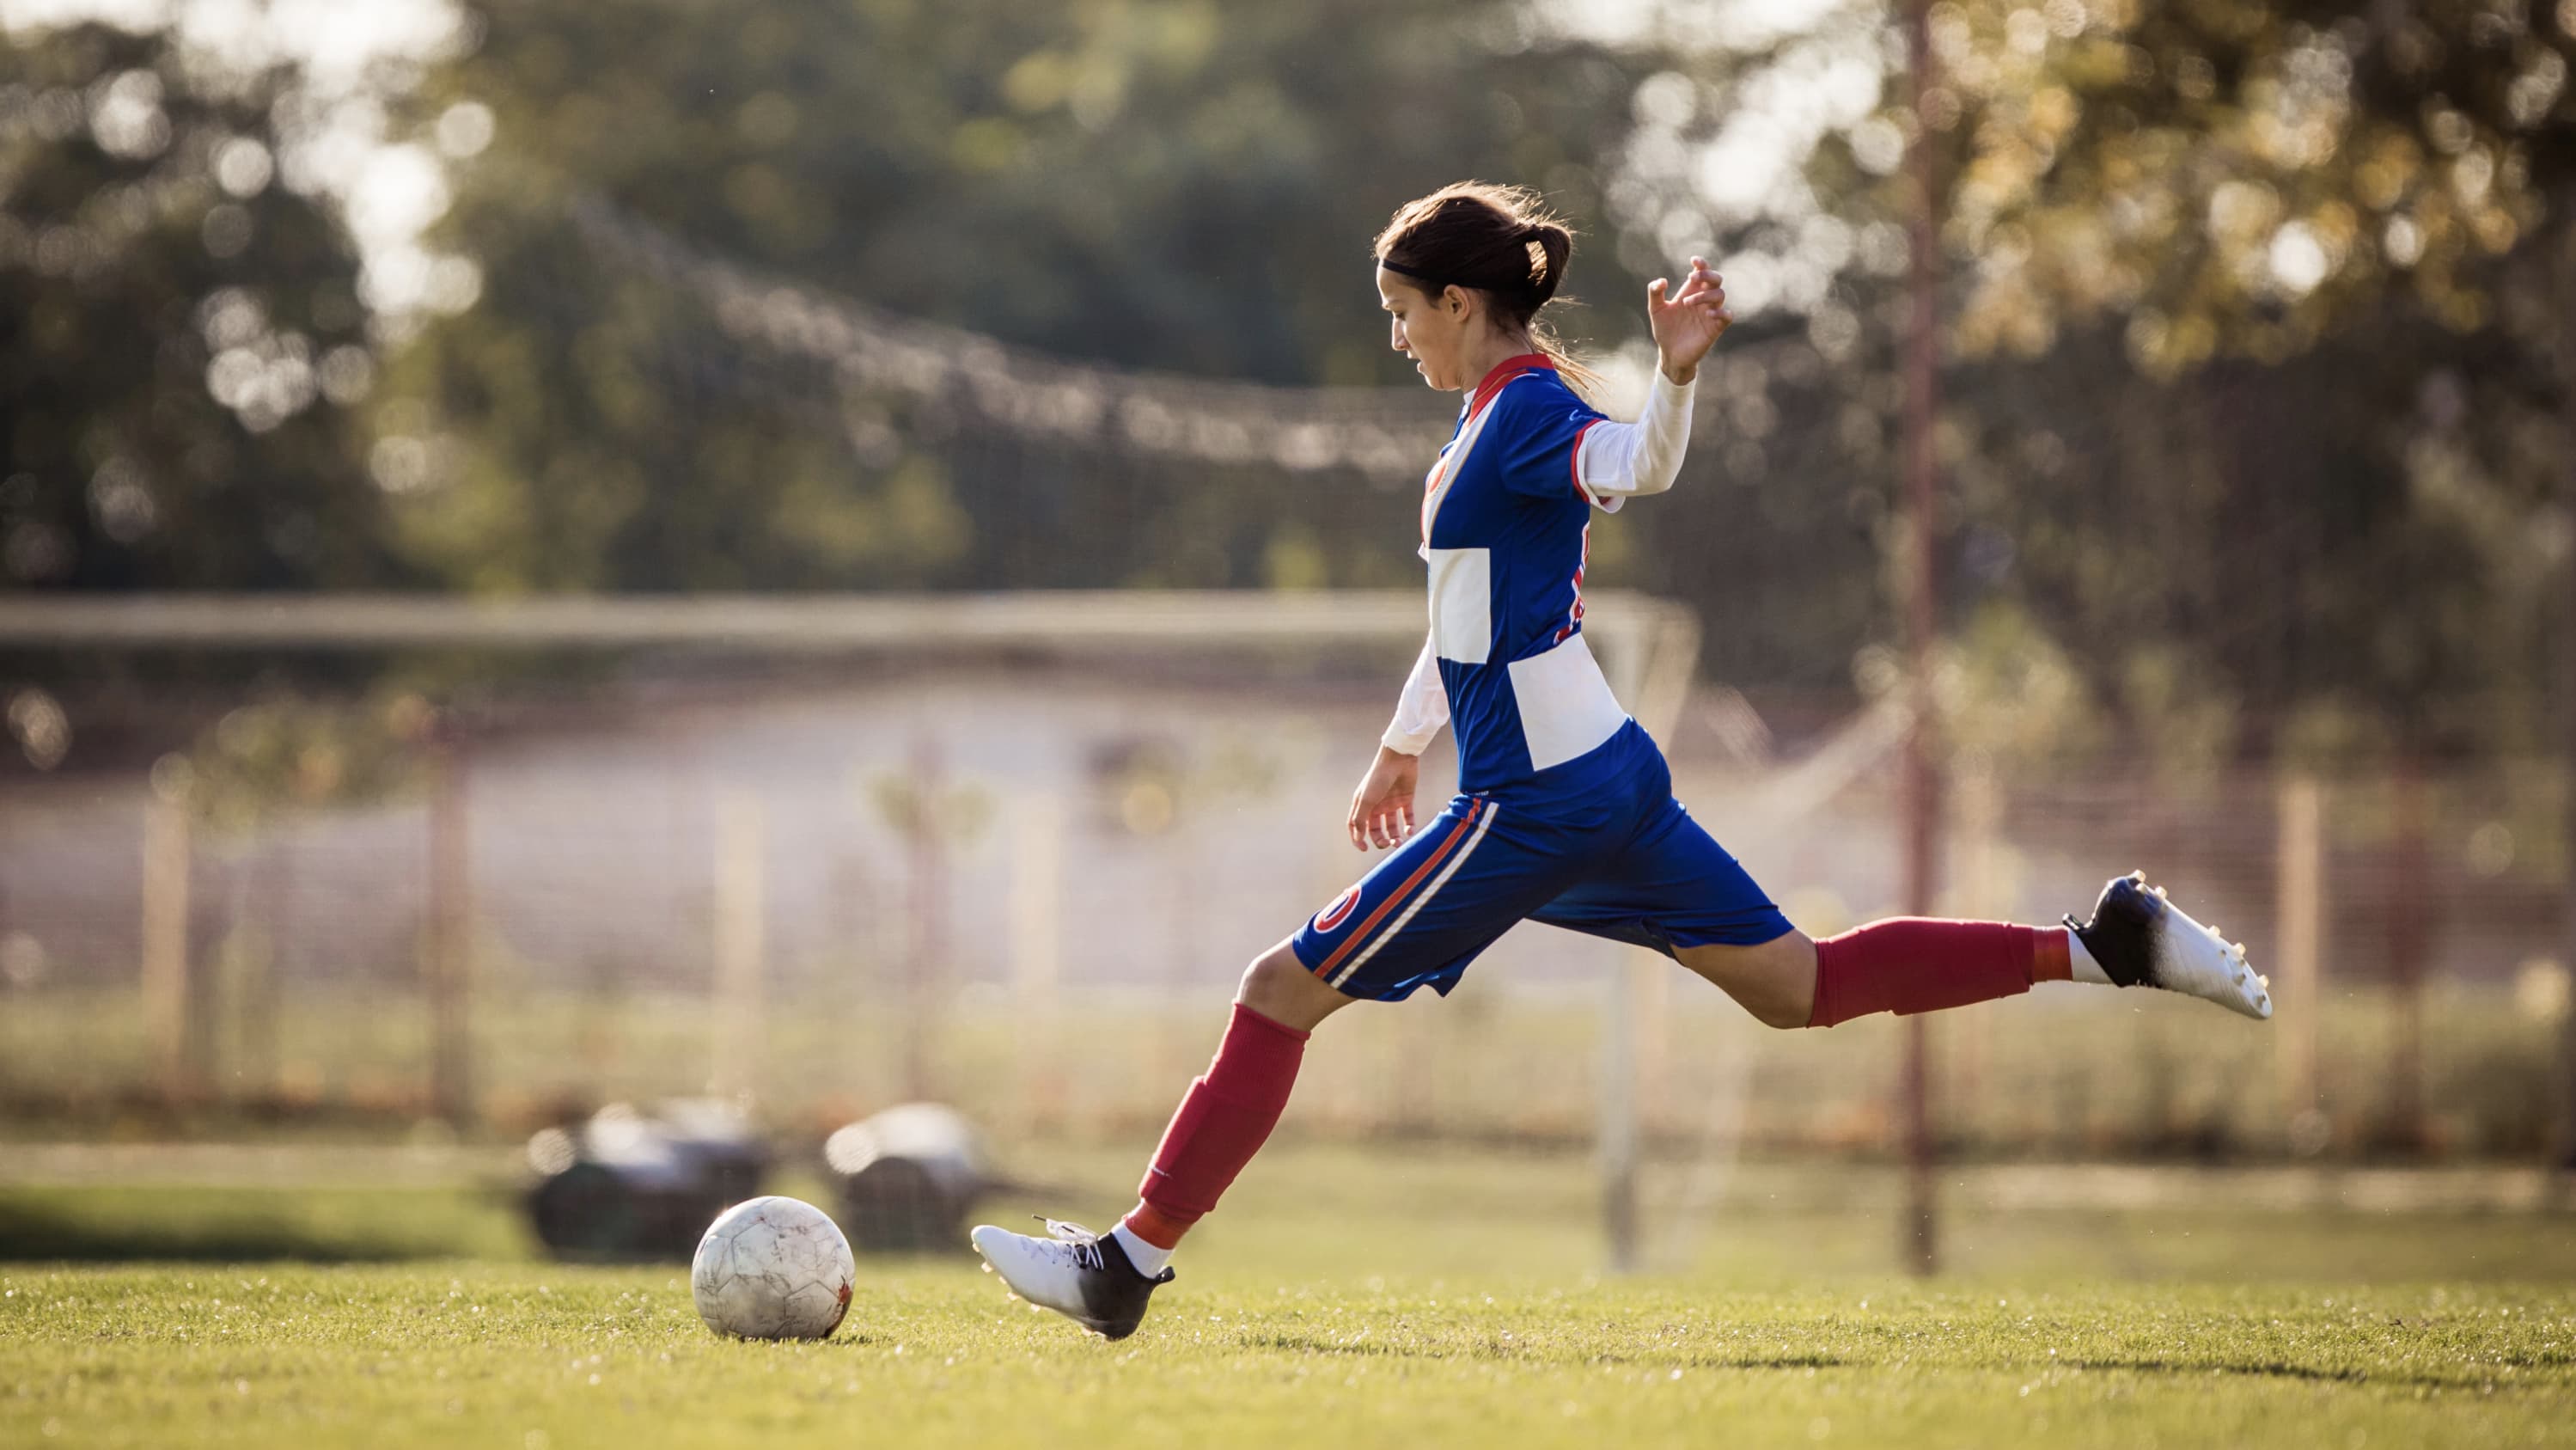 Female soccer player, who may be more at risk for ACL injury than her male peers